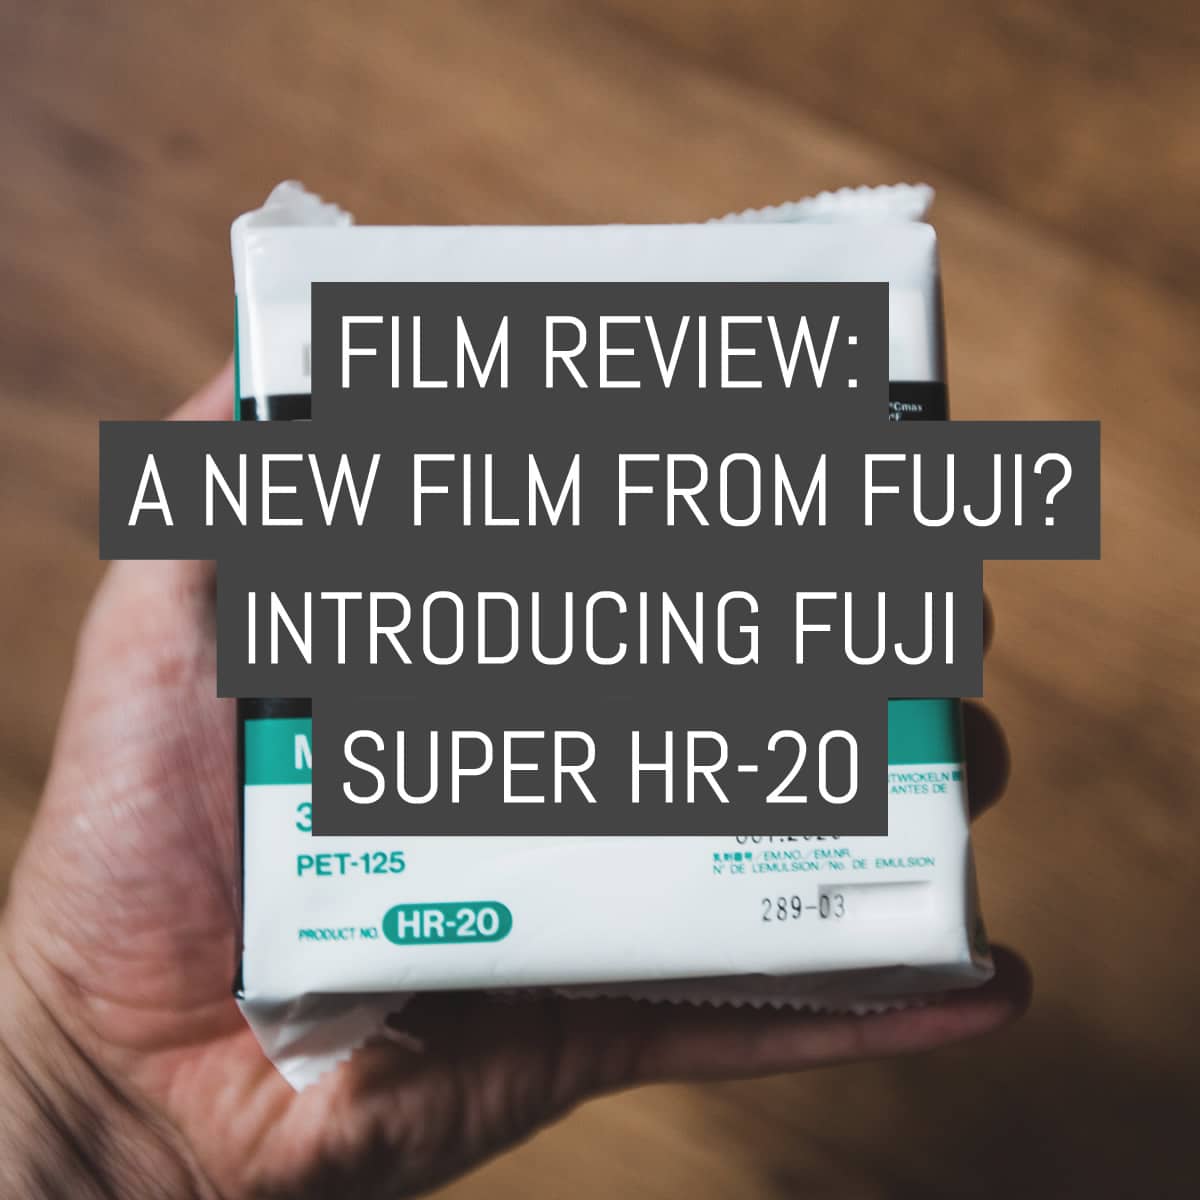 Film stock review: A new film from Fuji? Introducing Fuji Super HR-20, small grain for a small wallet